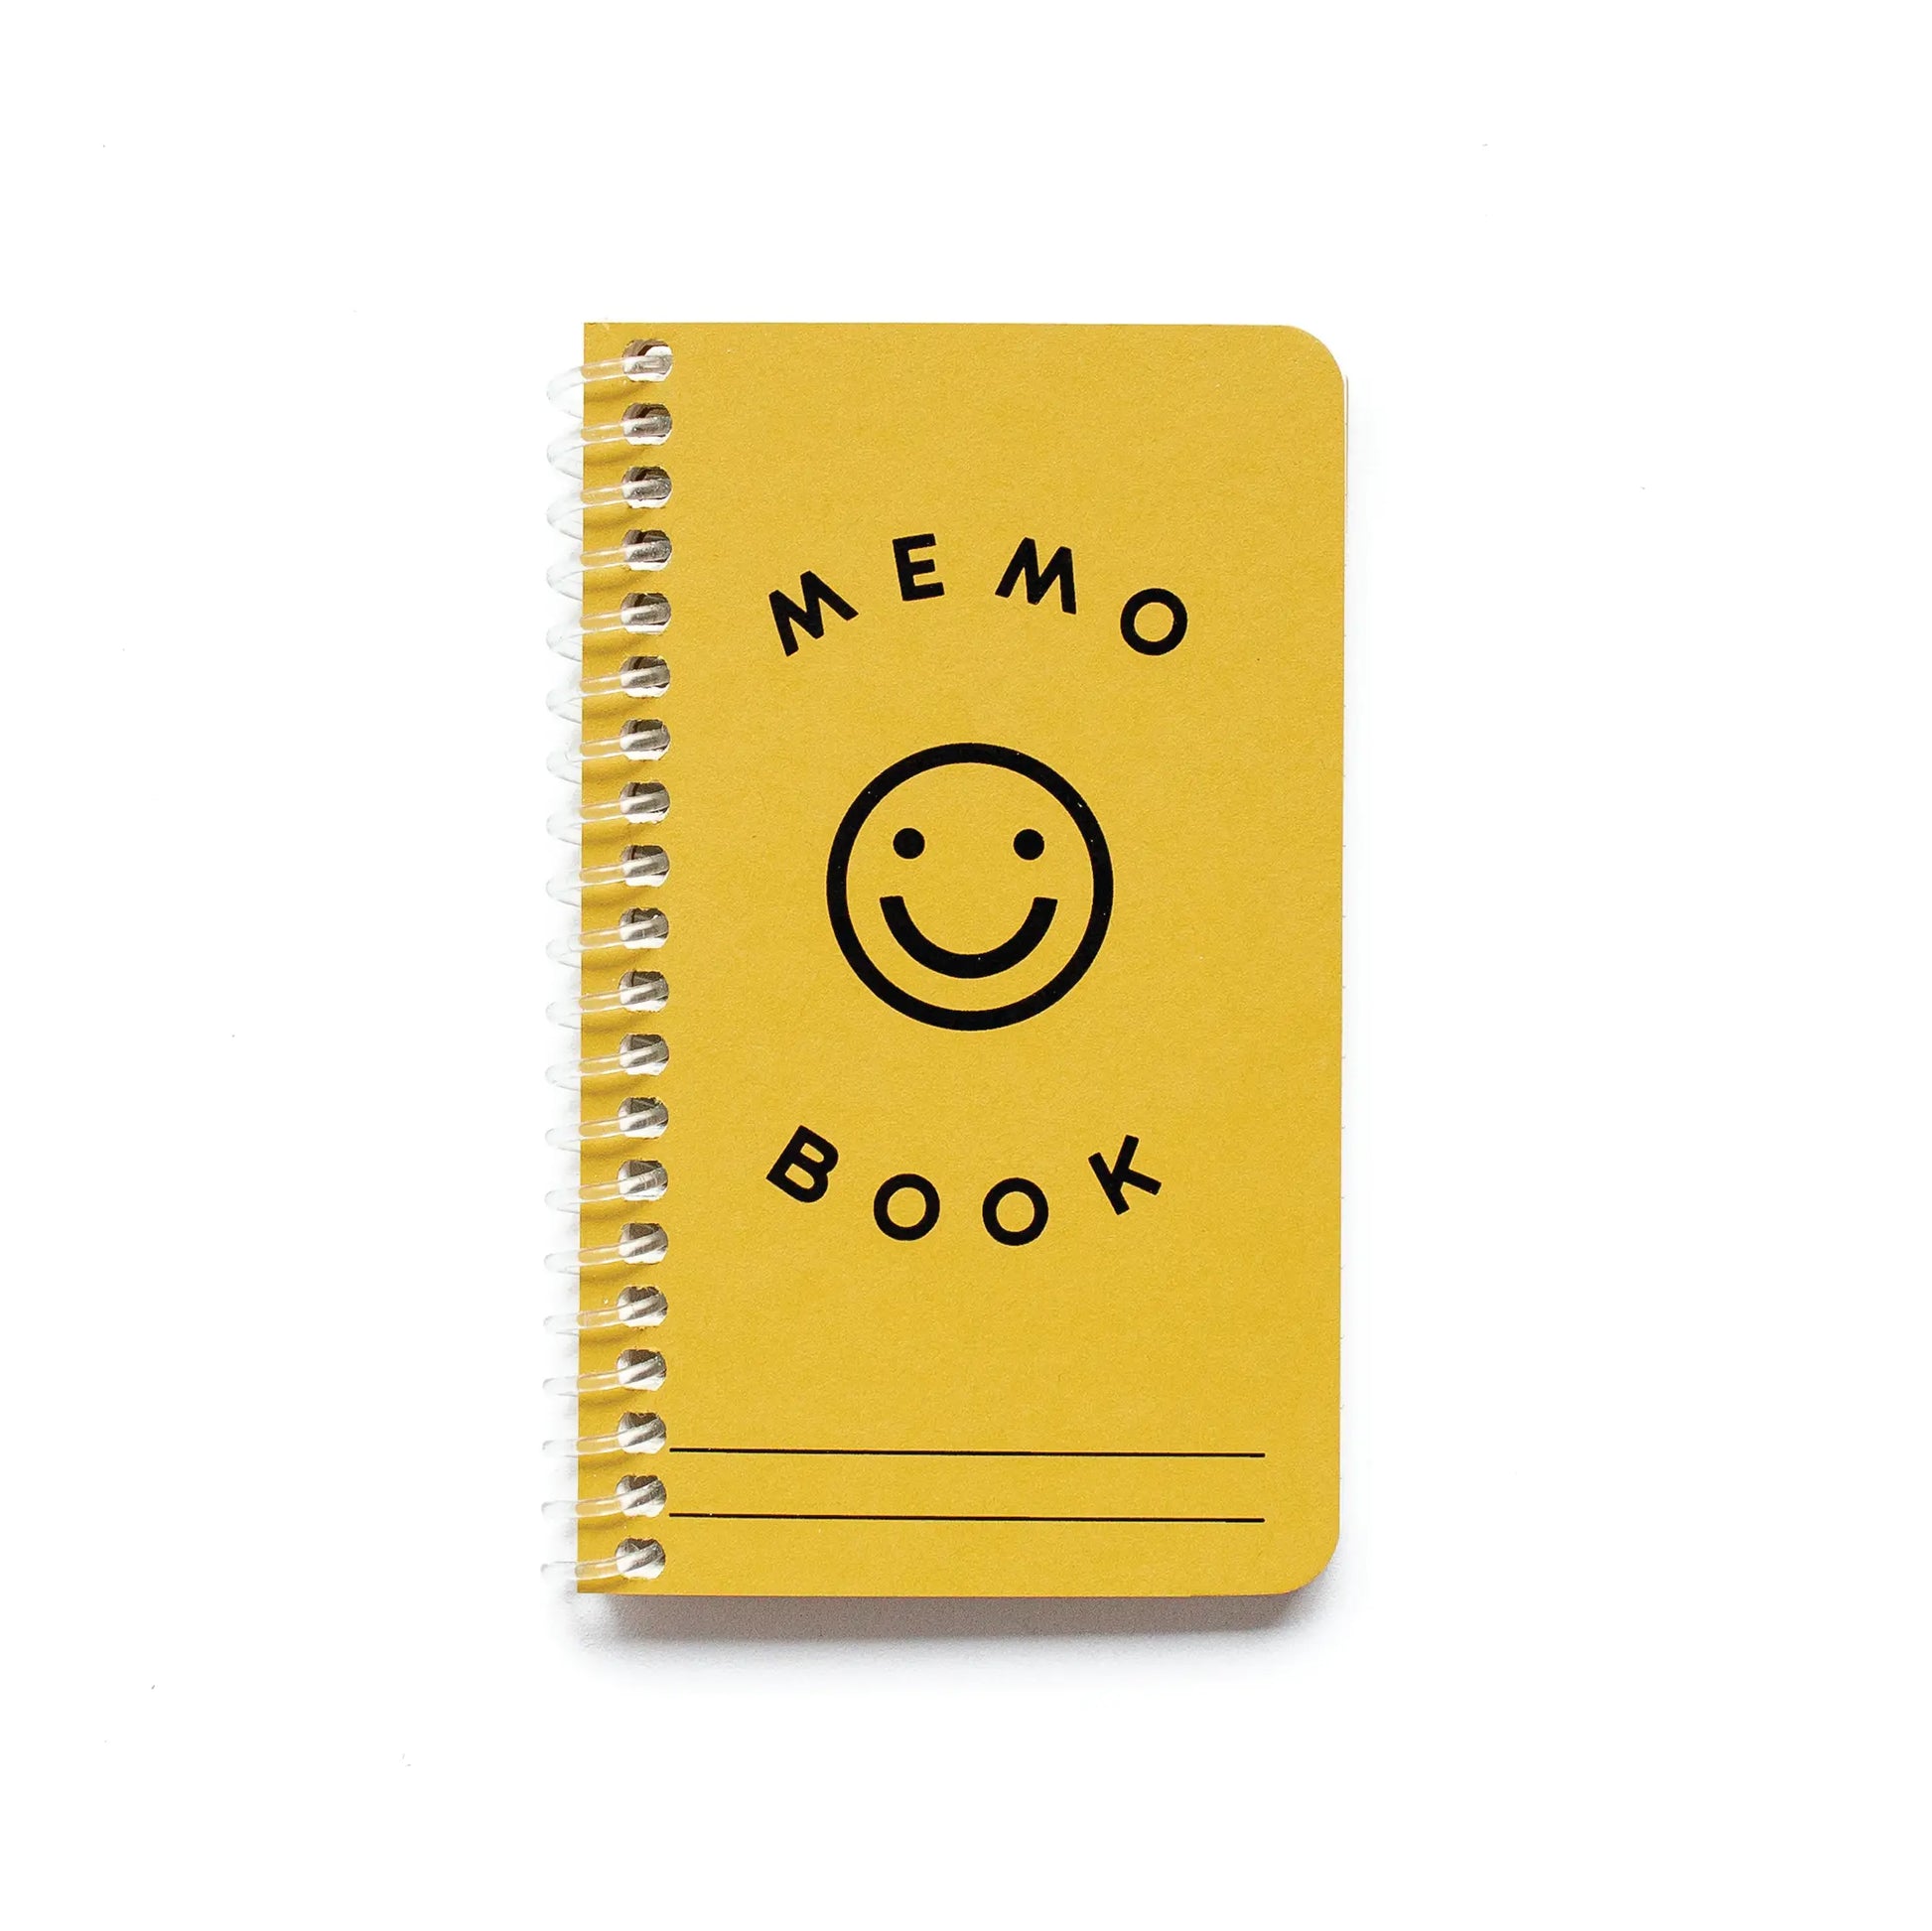 Memo Books by Worthwhile Paper - Smile by K. A. Artist Shop - K. A. Artist Shop